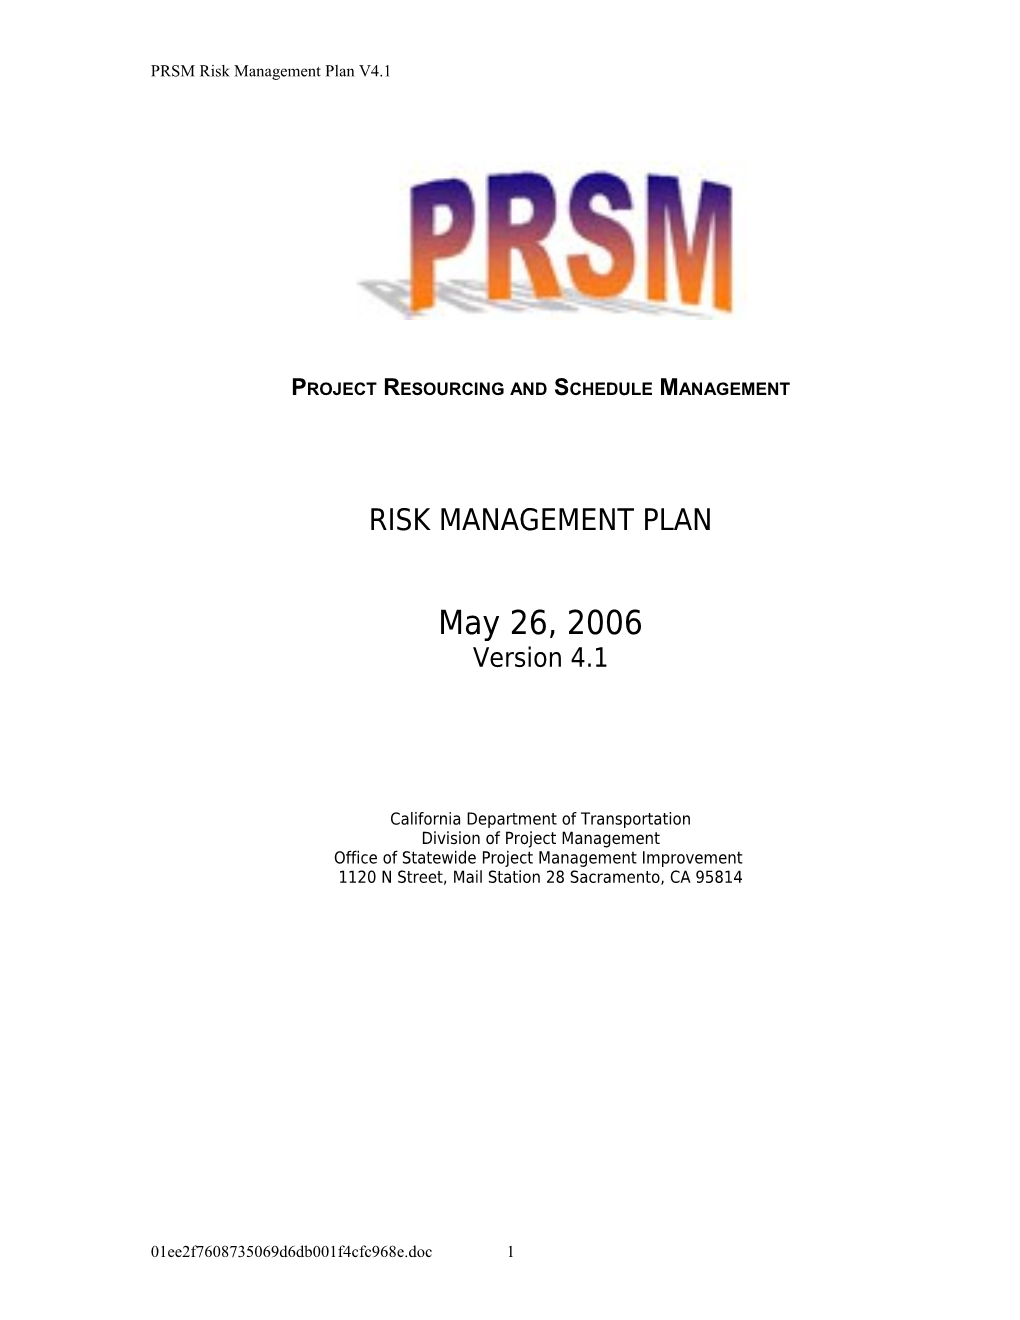 The Risk Manager Collected All Previous and Current Risks for the PRSM Project and Combined